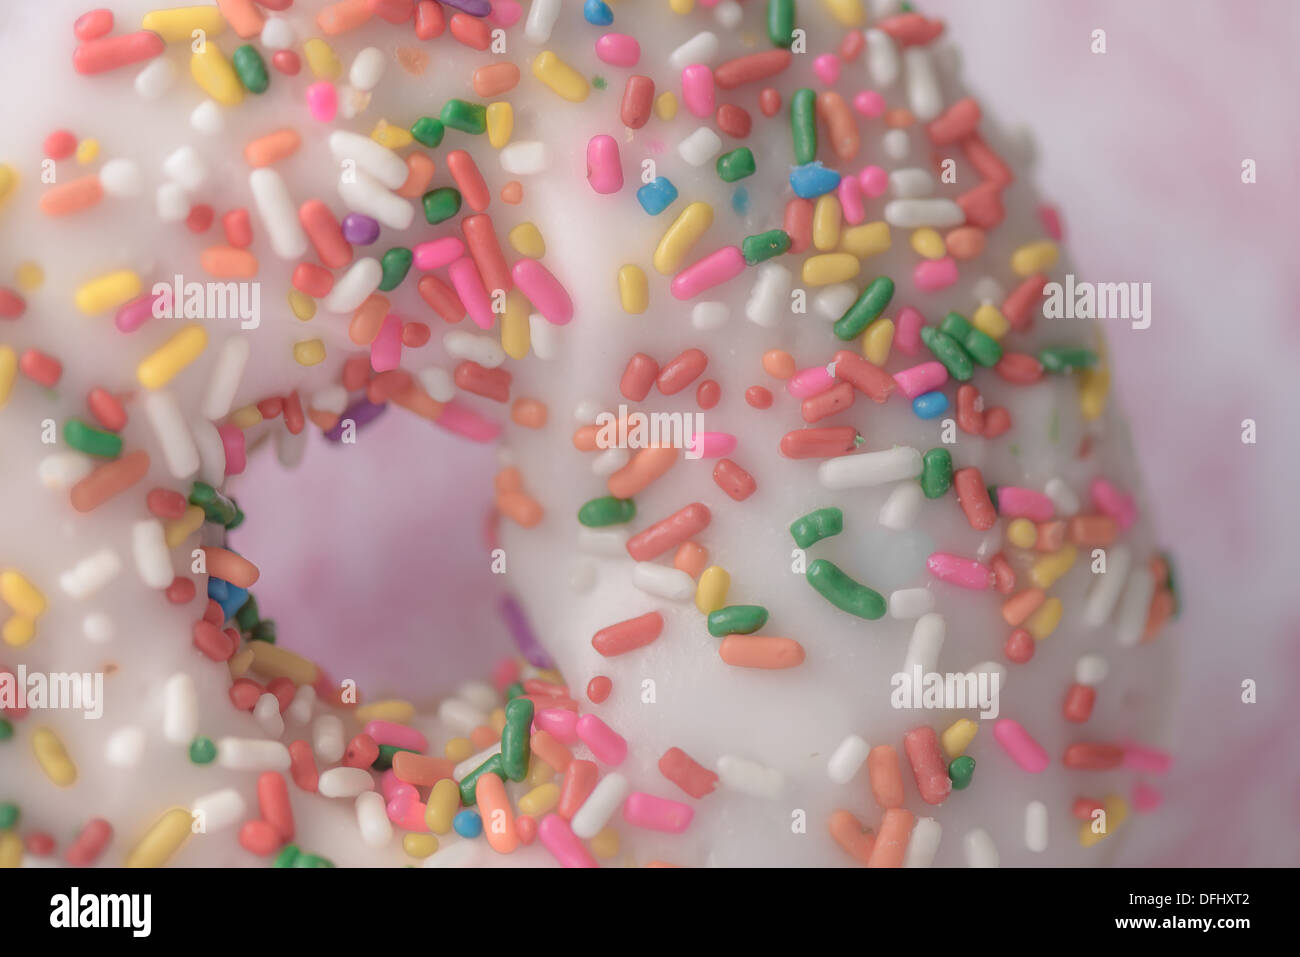 Frosted donut with colored sprinkles Stock Photo